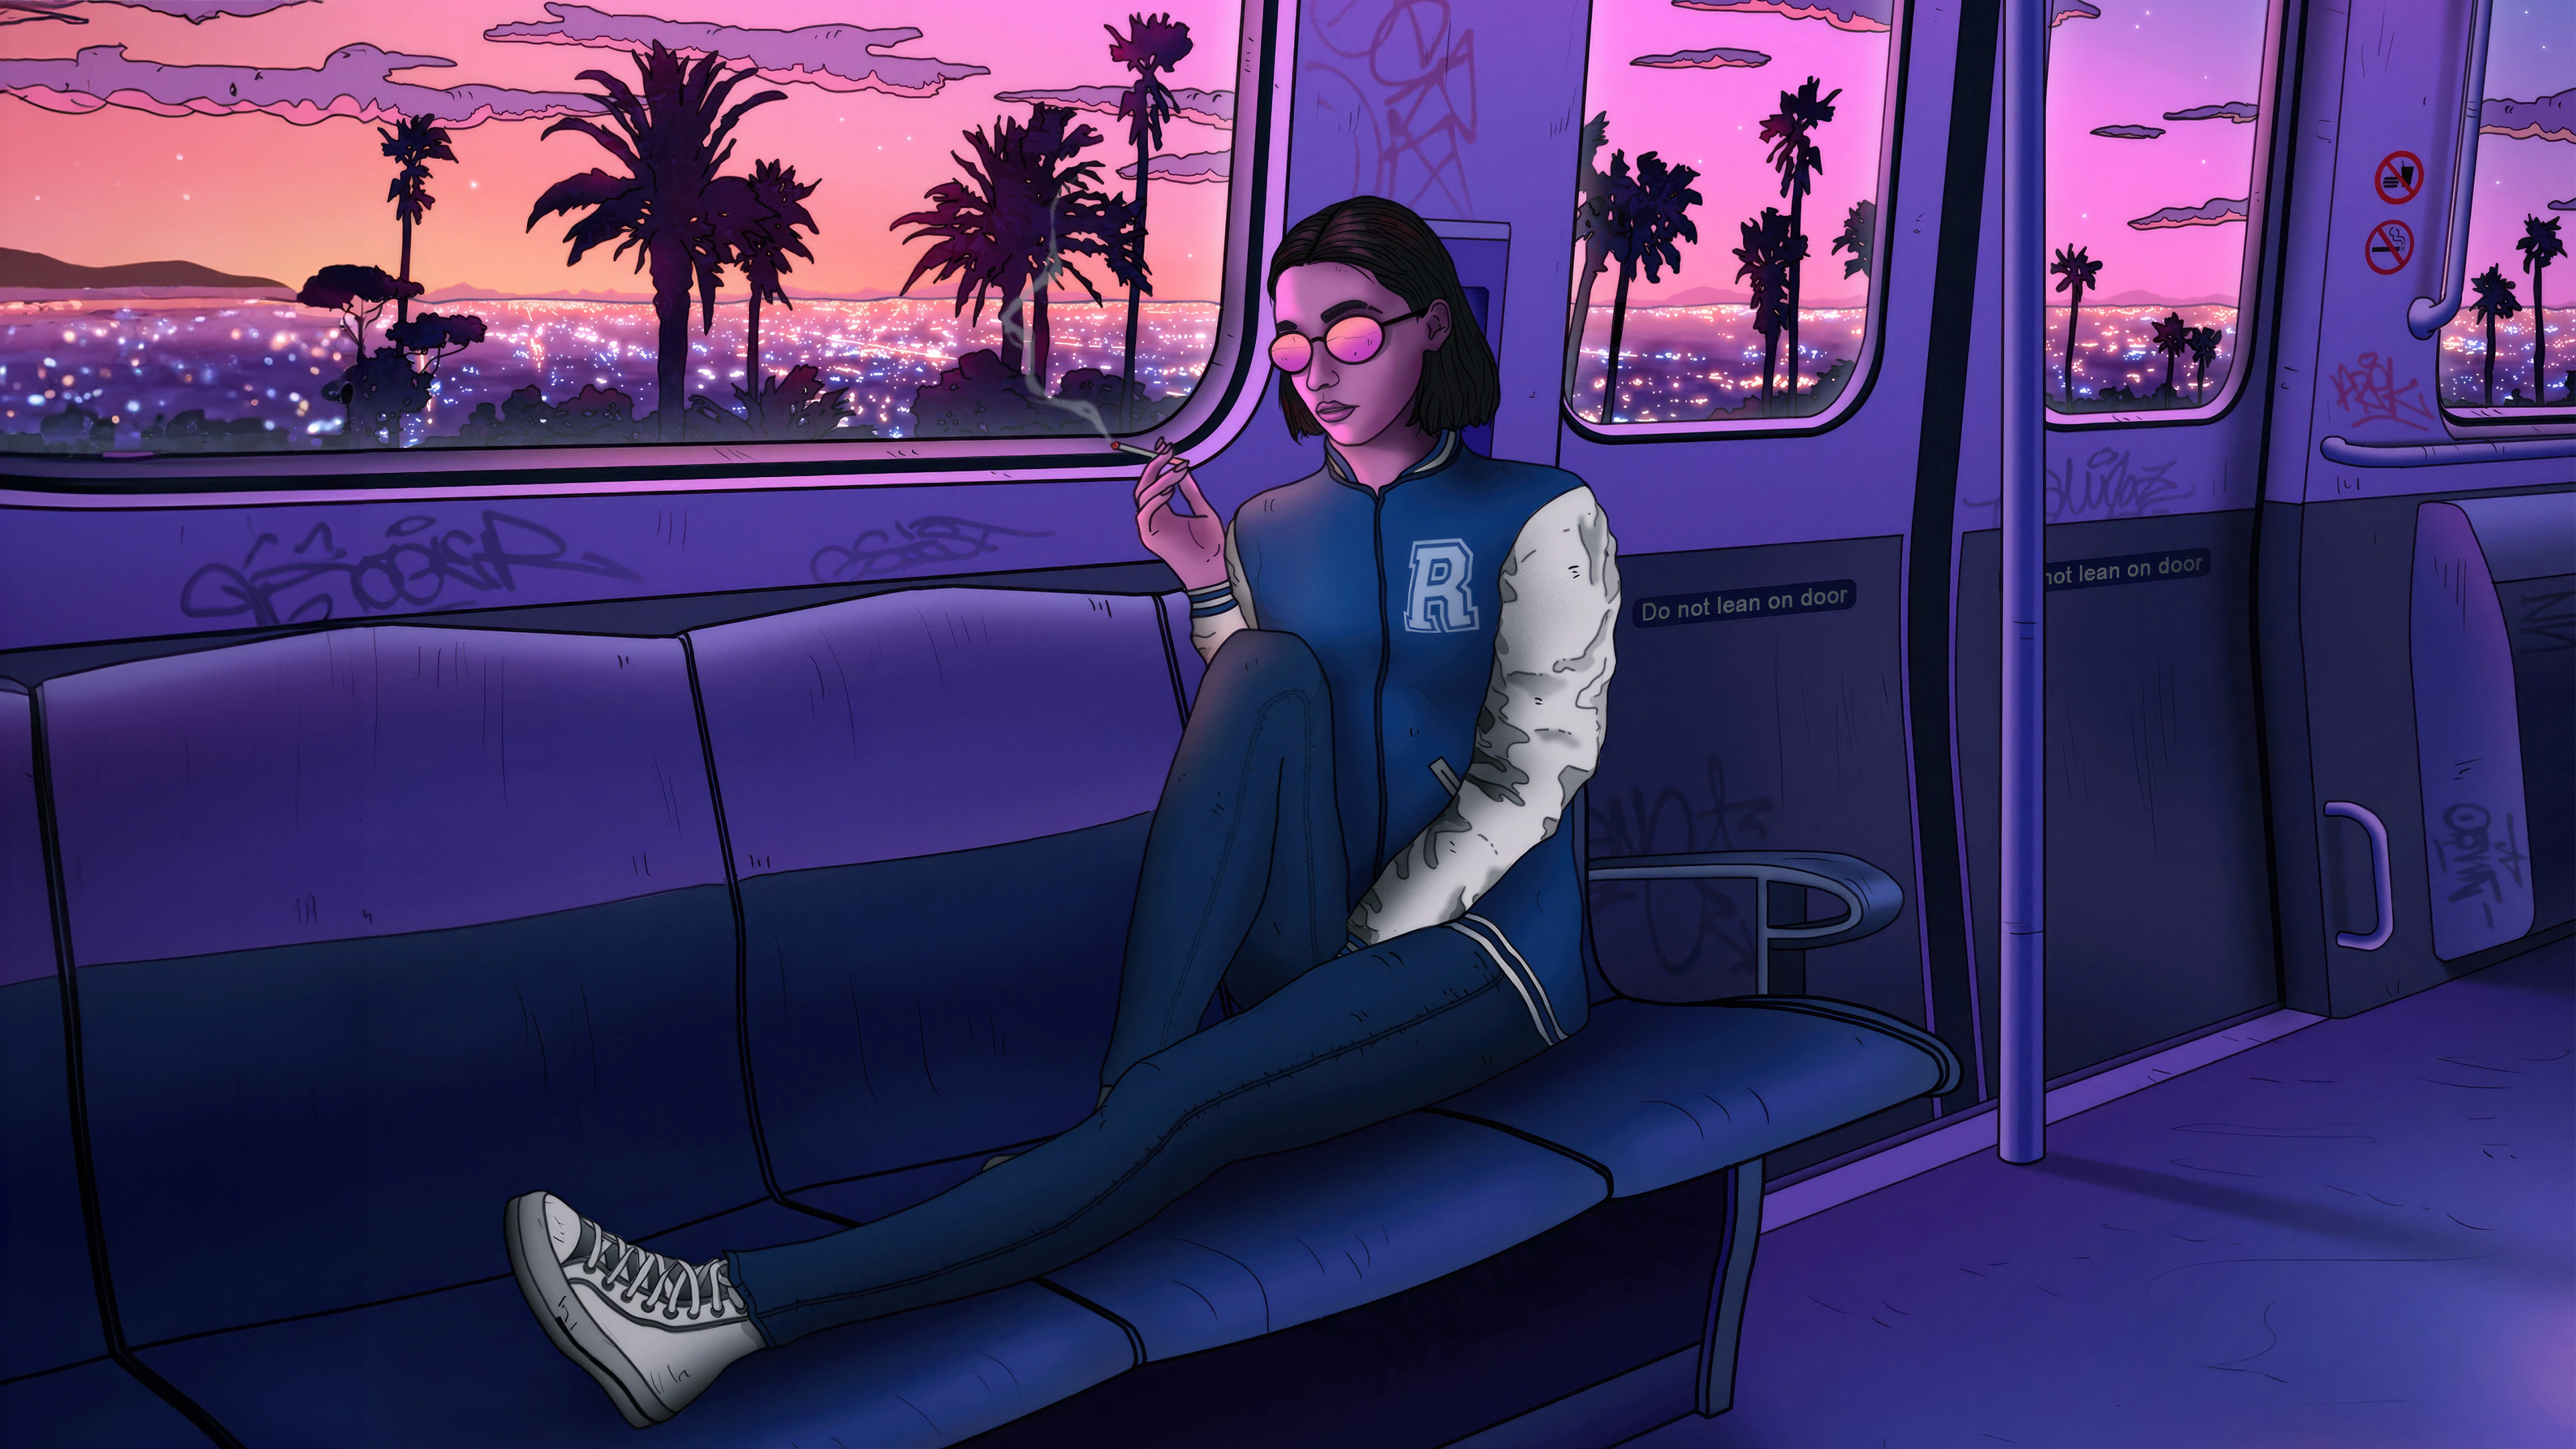 synthwave chic cool girl drives the train back xp.jpg